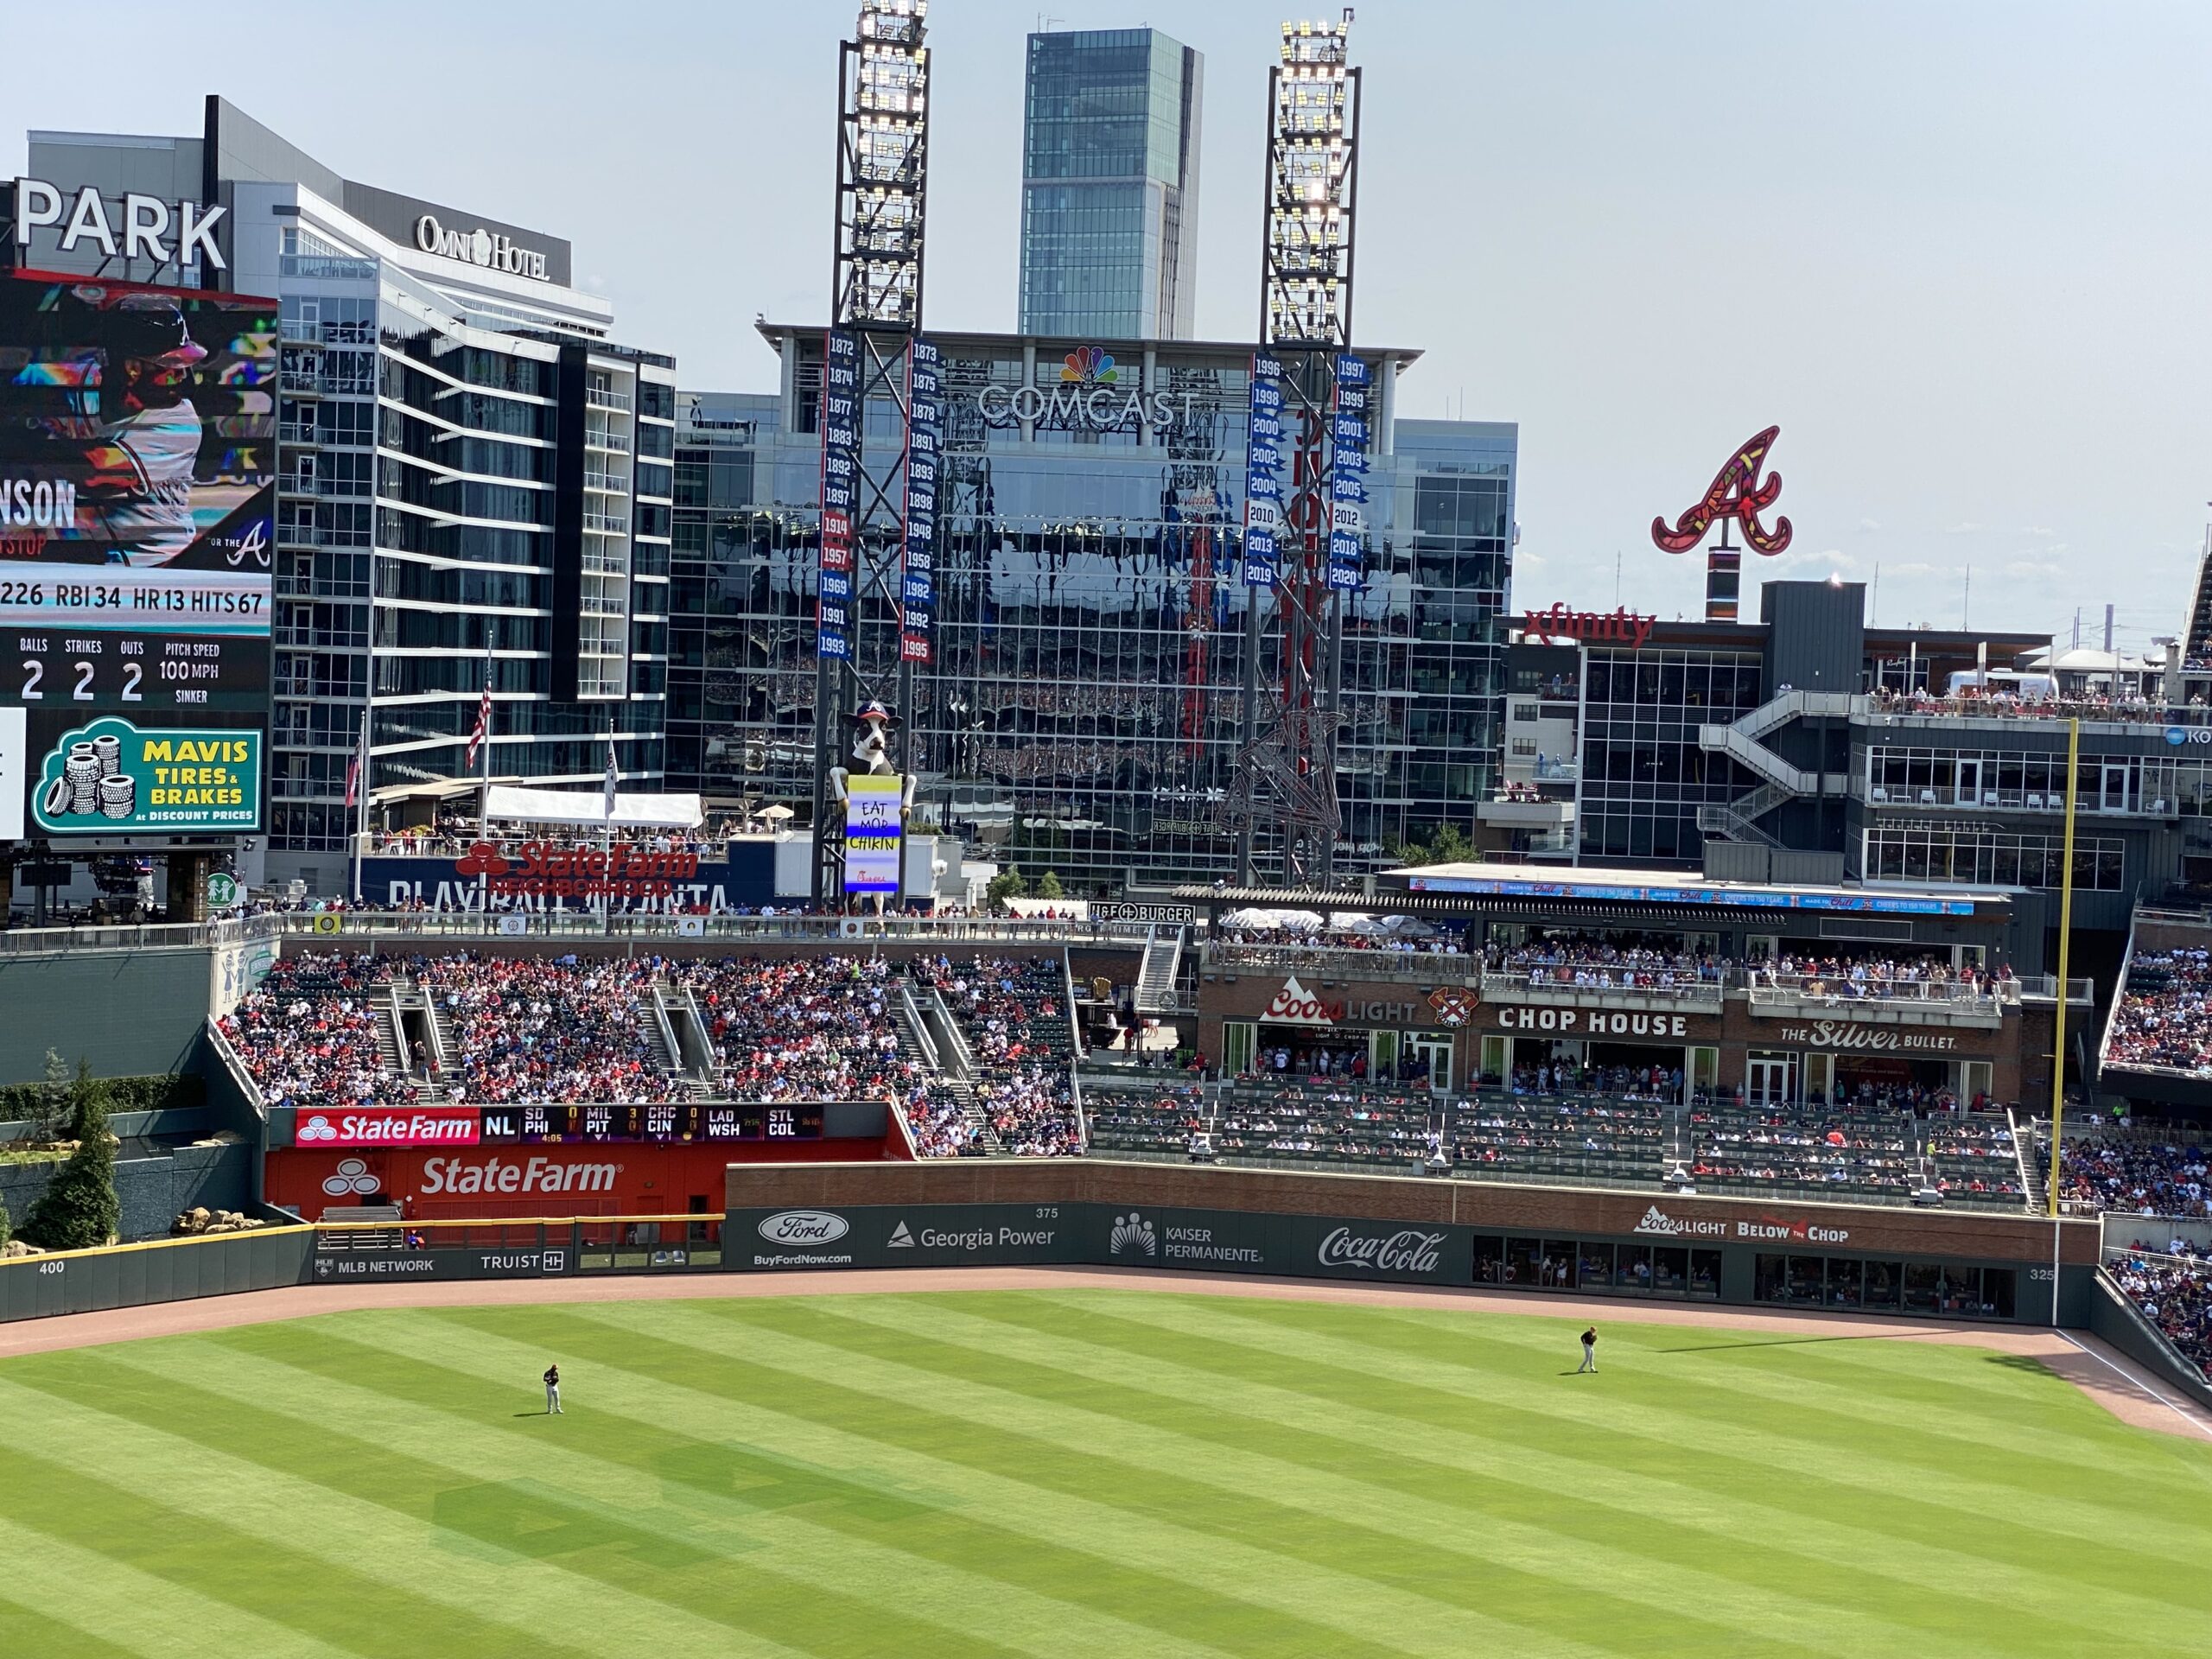 Truist Park, information and more of the Atlanta Braves ballpark